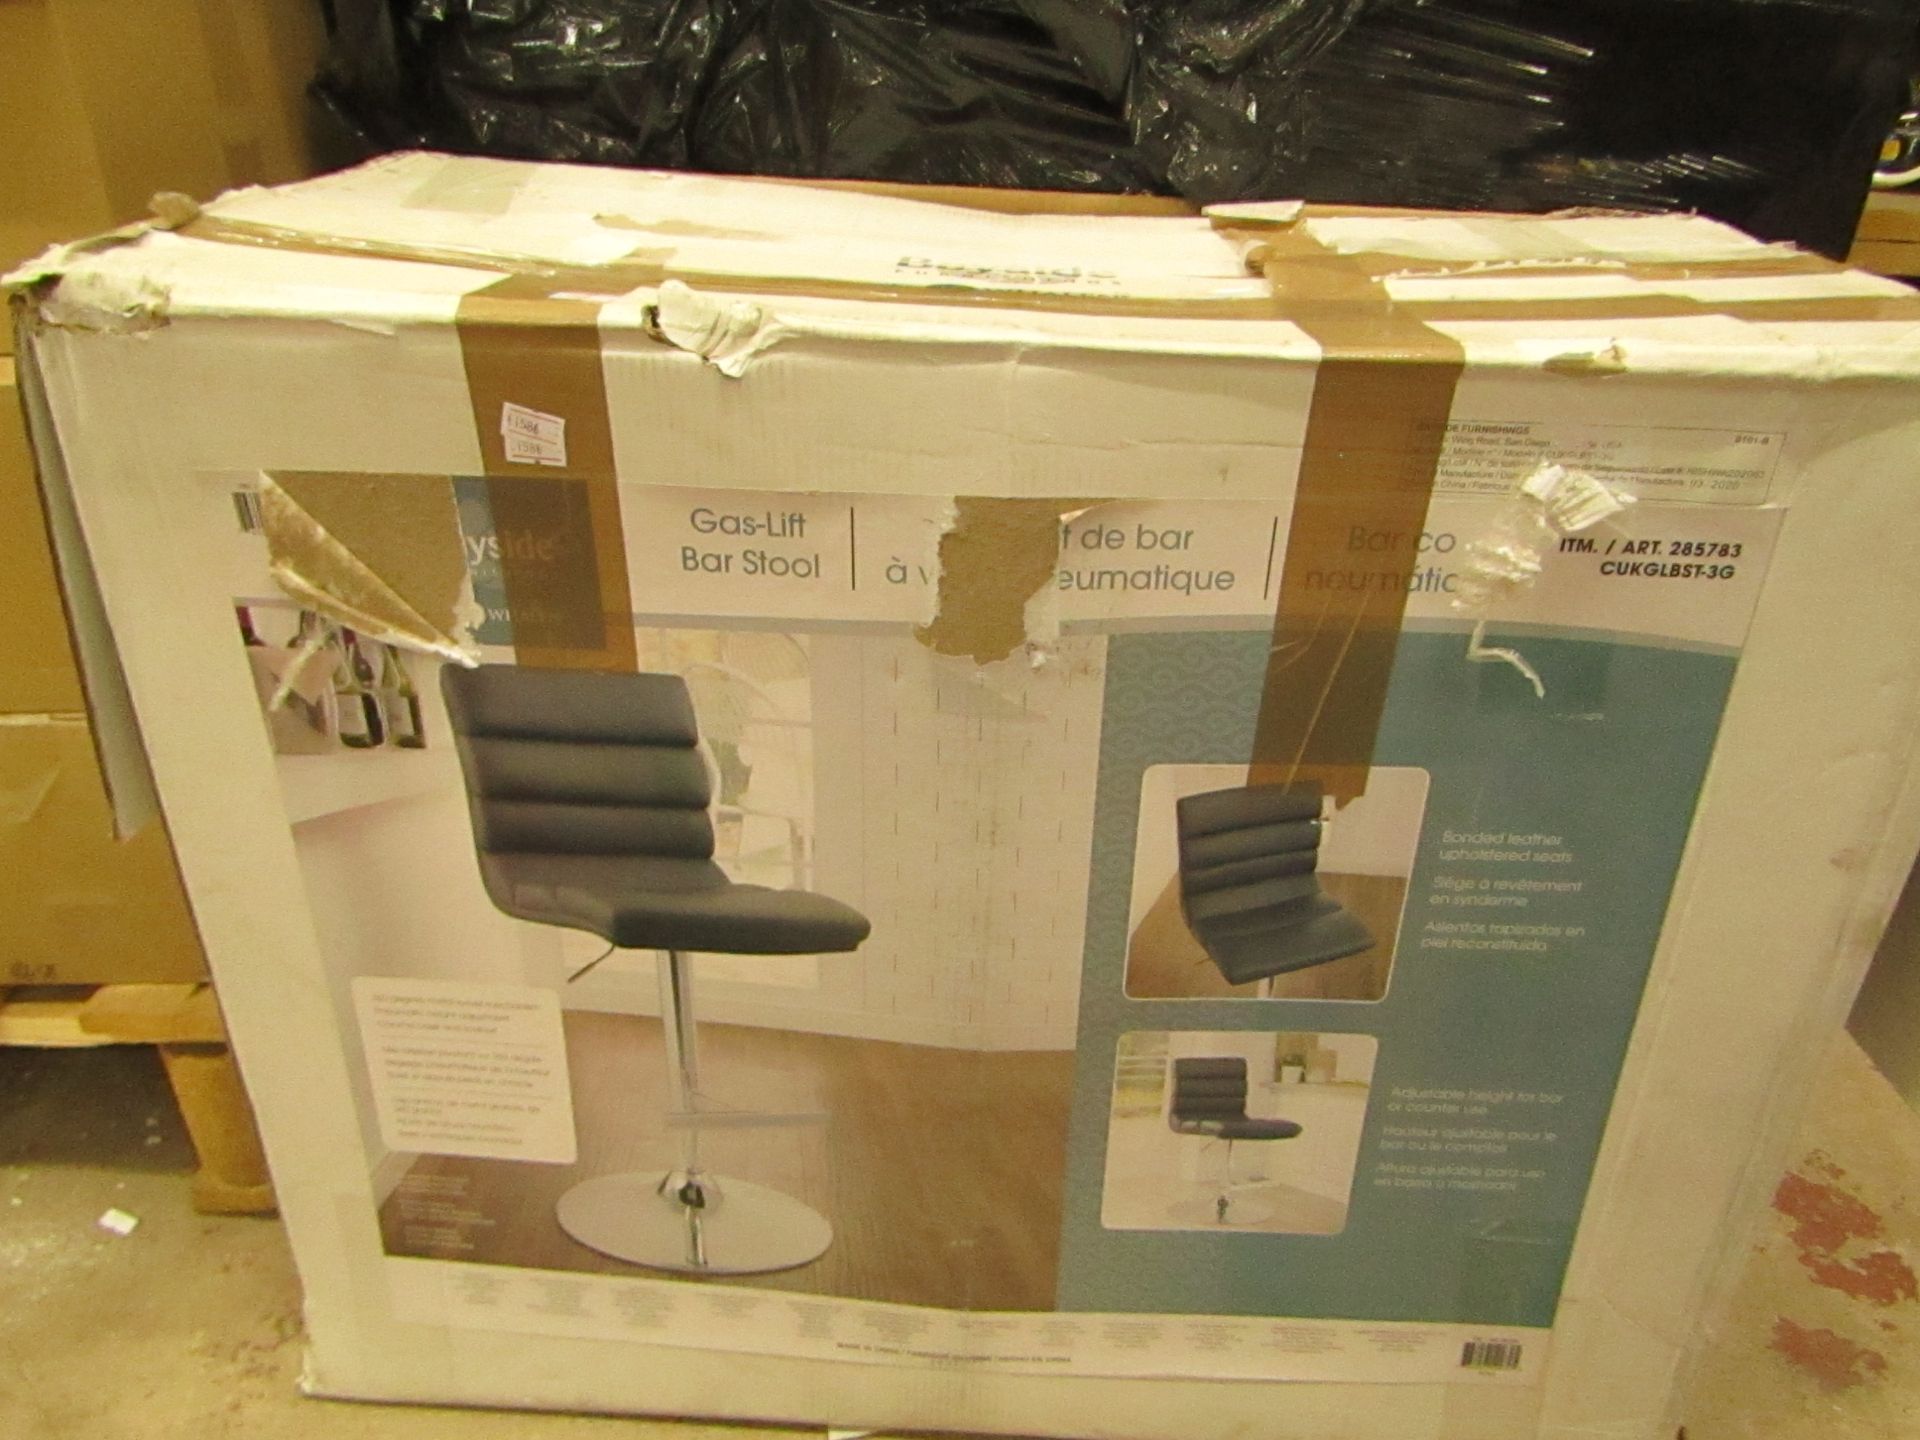 Bayside Furnishings Black Bonded Leather Gas Lift Bar Stool, Unchecked & Boxed